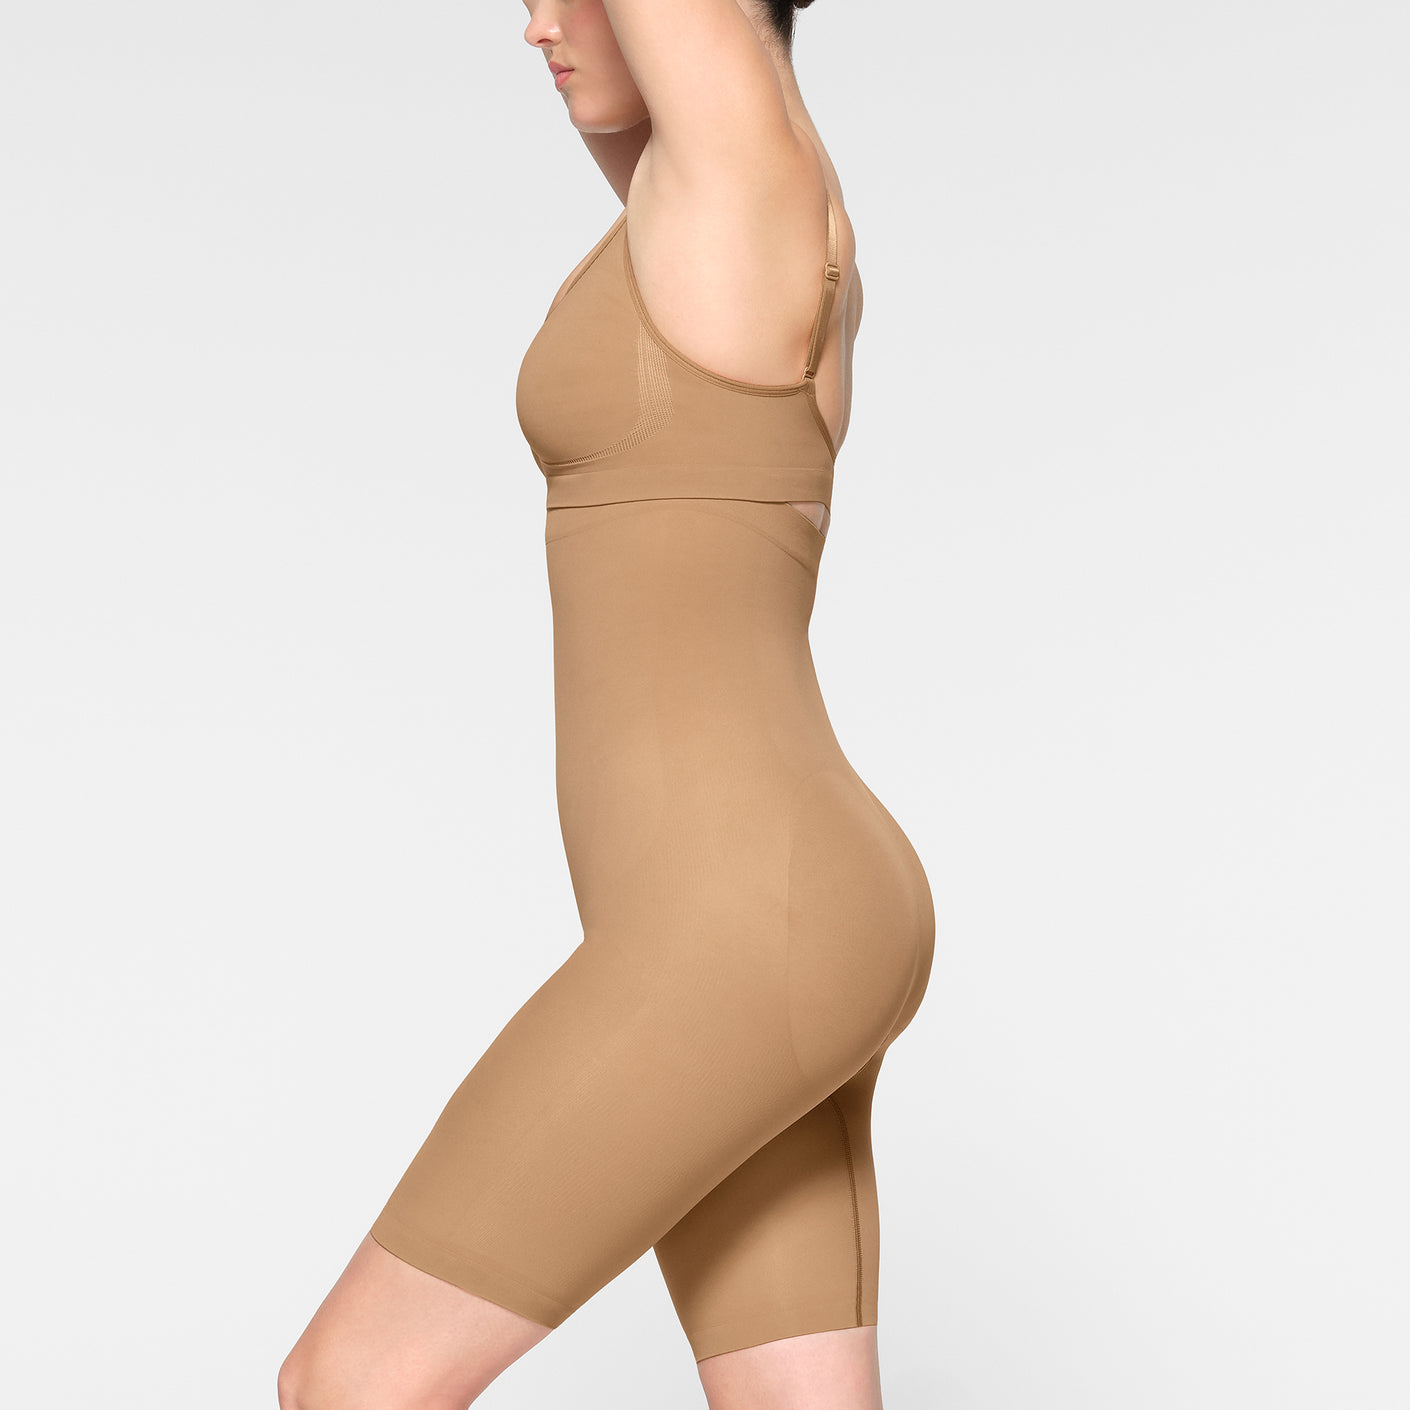 A new standard of shapewear. SKIMS Seamless Sculpt offers game